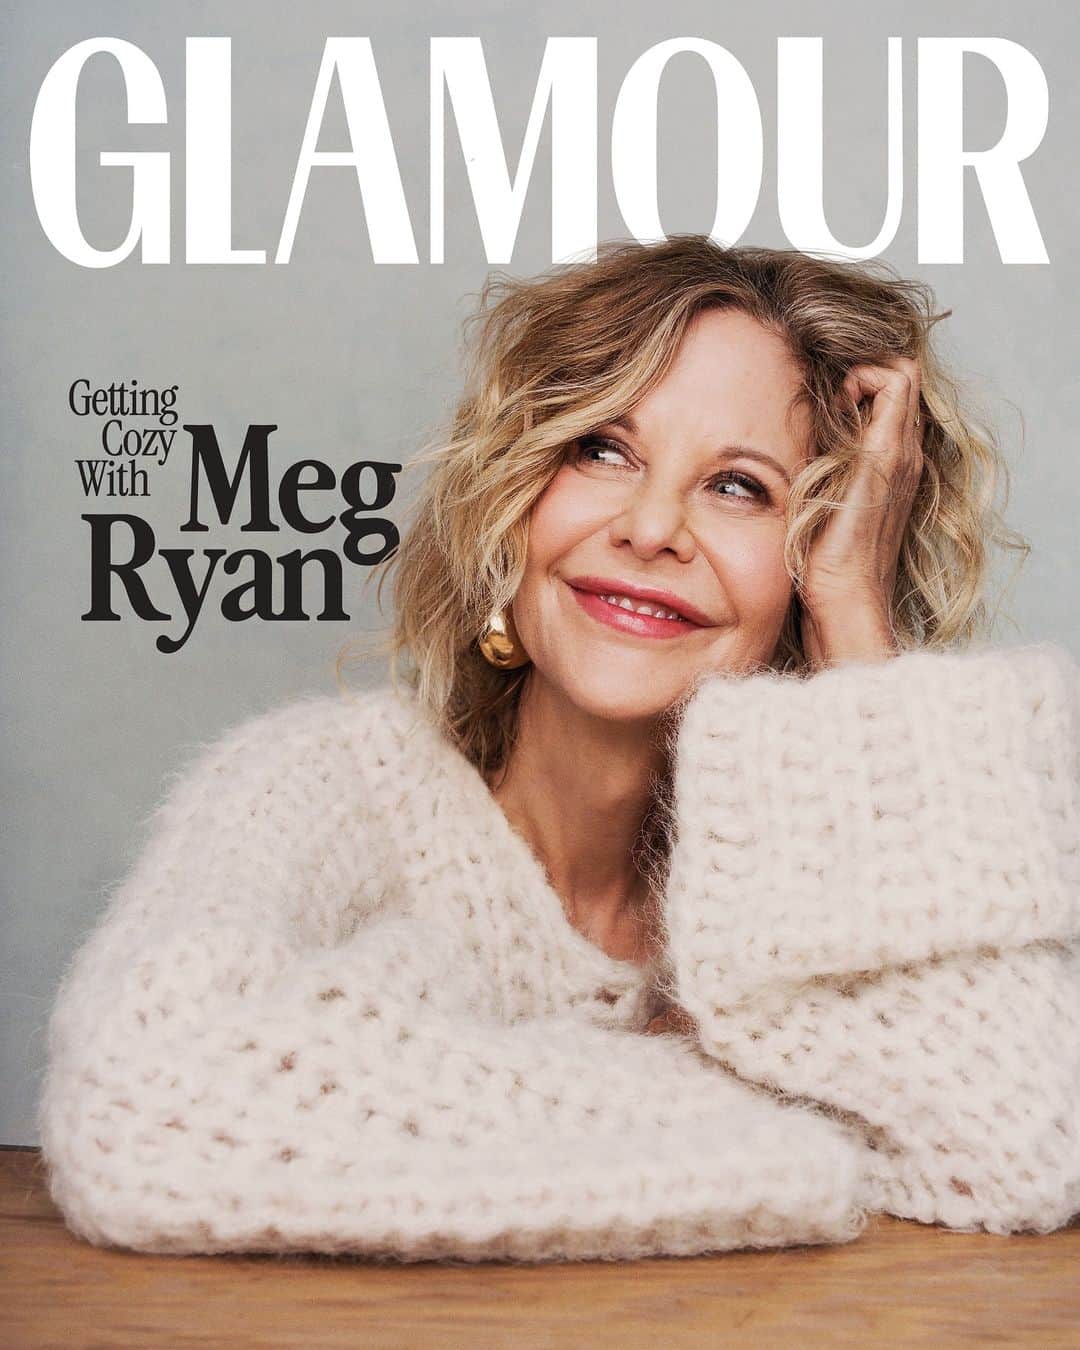 Glamour Magazineのインスタグラム：「Meg Ryan is back and she’s better than ever. Glamour’s December cover star has been out of the spotlight for eight years, but she’s jumping back in with a new movie, “What Happens Later,” that she not only stars in but also cowrote and directed. In a candid interview, @cbroday sat down with the beloved actor at New York’s iconic Carlyle Hotel to discuss directing during the pandemic, dating in her 60s, motherhood, the “moonshot” trifecta of her three highest-grossing ’90s rom-coms, why worrying about gossip culture just isn’t worth it, and more. And yes, there are some great sweaters. Fall in love with America’s sweetheart all over again at the link in bio.  Photographed by @sheekswinsalways Stylist: @carolinaorrico Hair: @derrick.spruill Makeup: @jostrettell Manicure: @nailsbyemikudo Set Design: @kellys_phone On Set Producer: @ilonski」